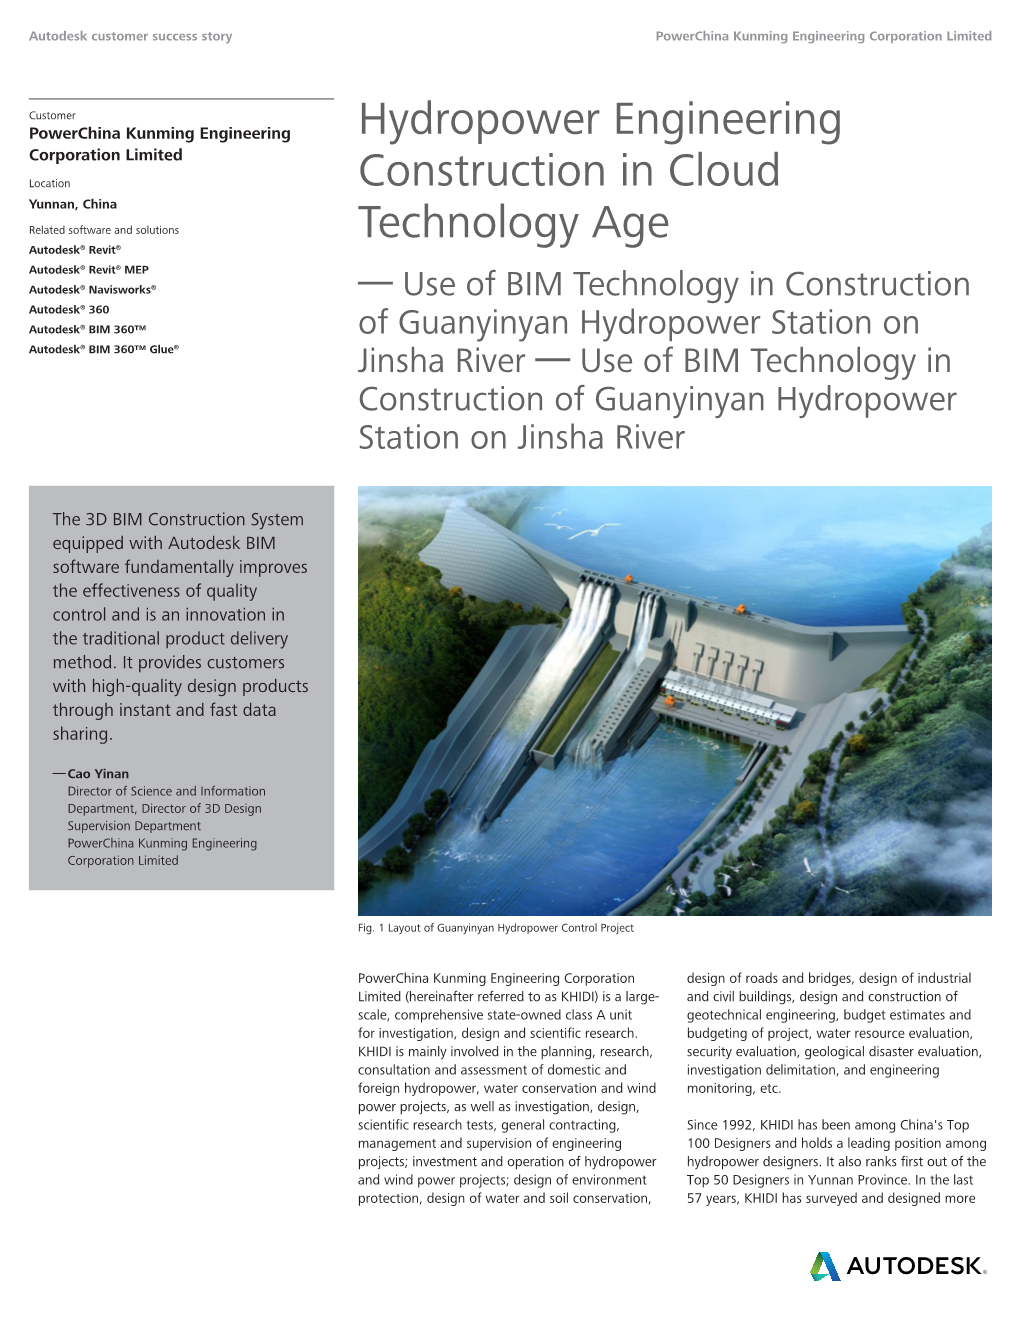 Hydropower Engineering Construction in Cloud Technology